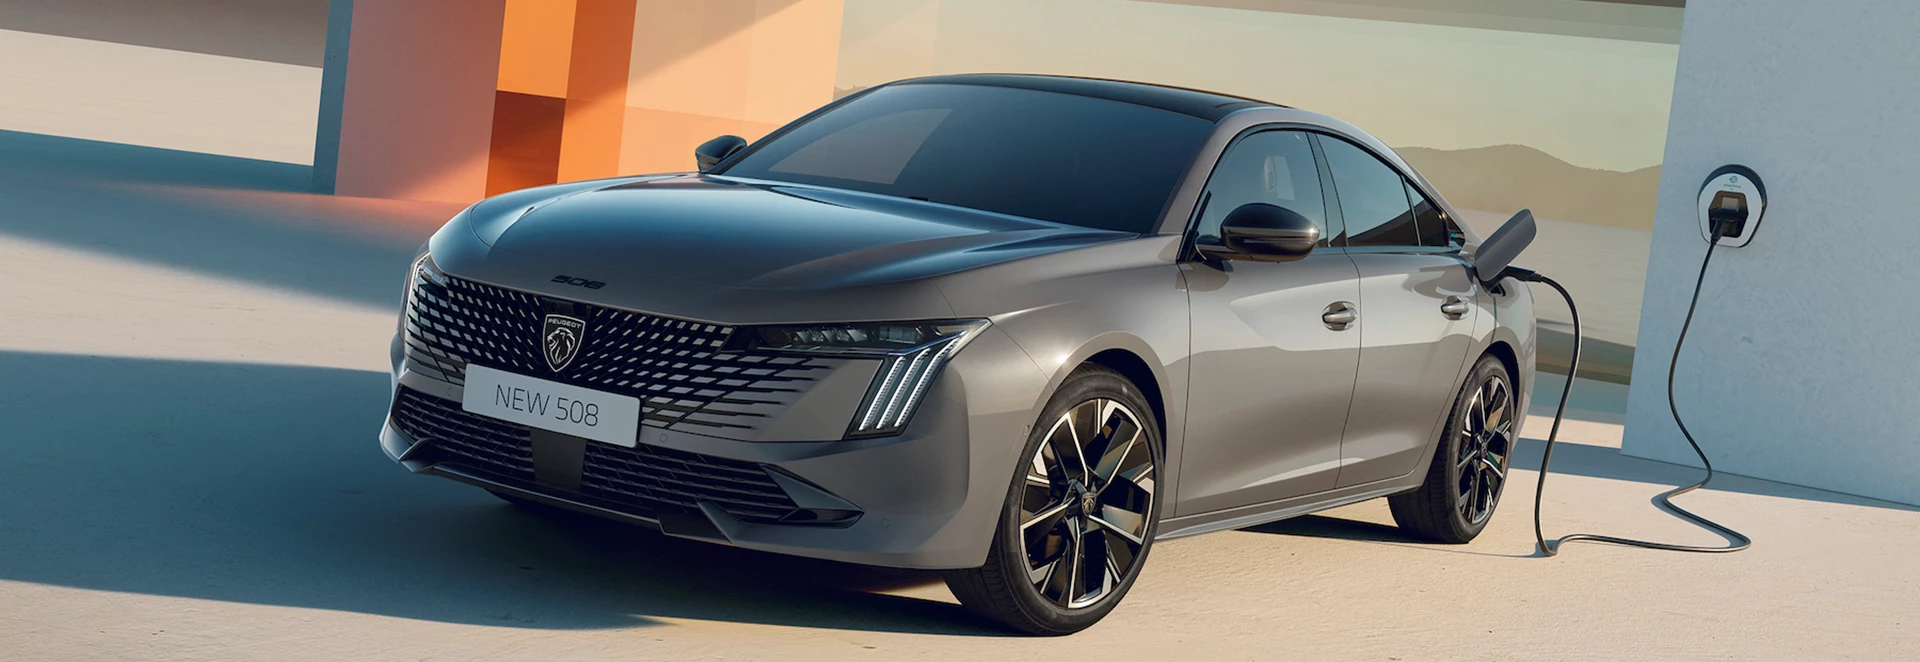 New Peugeot 508: What’s changed? 